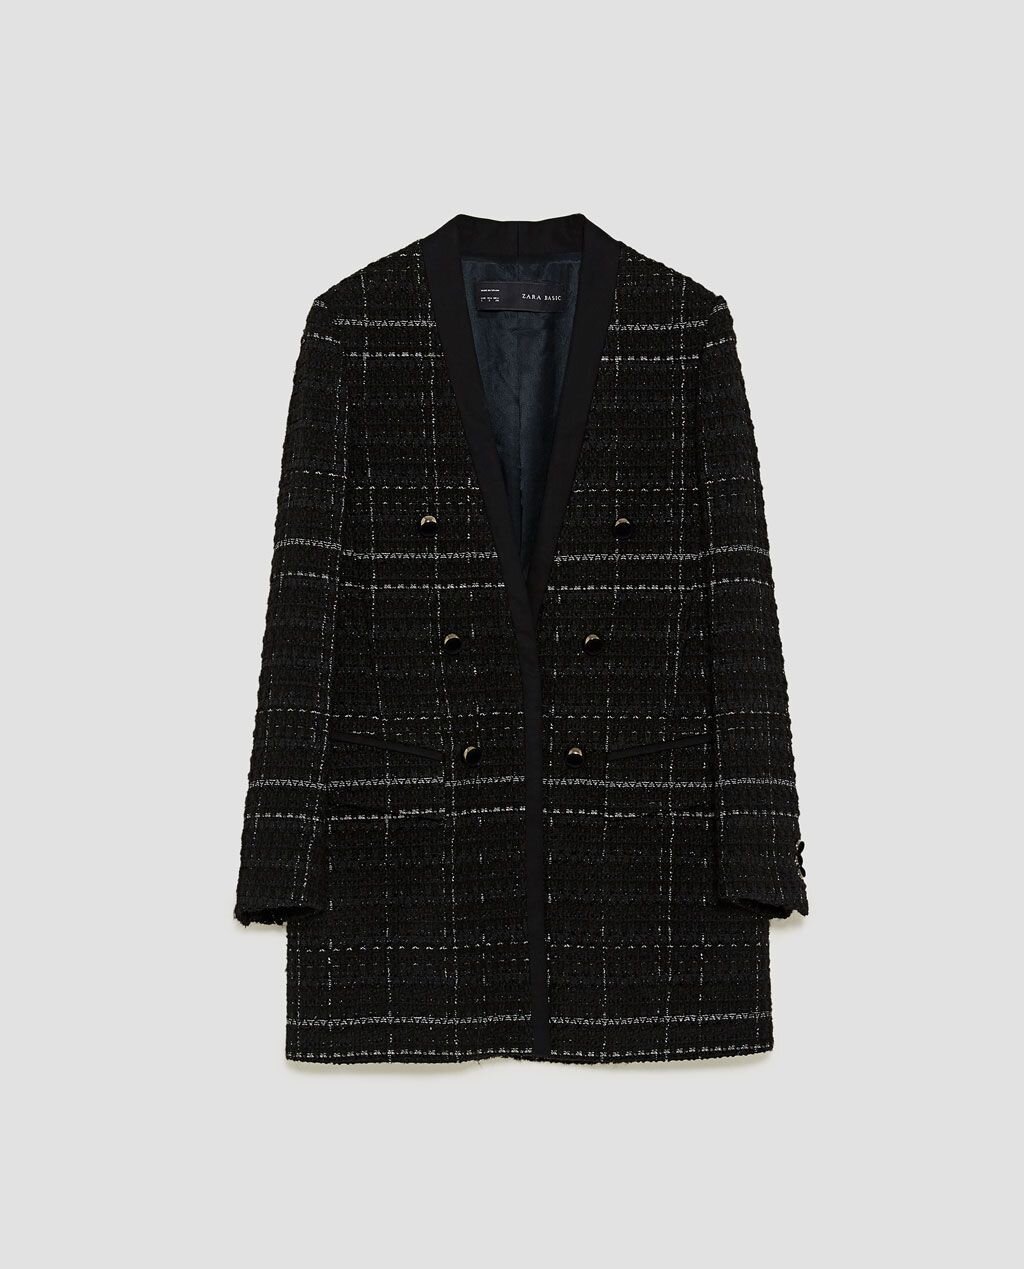 Zara Checked Frock Coat with Textured Weave.jpg